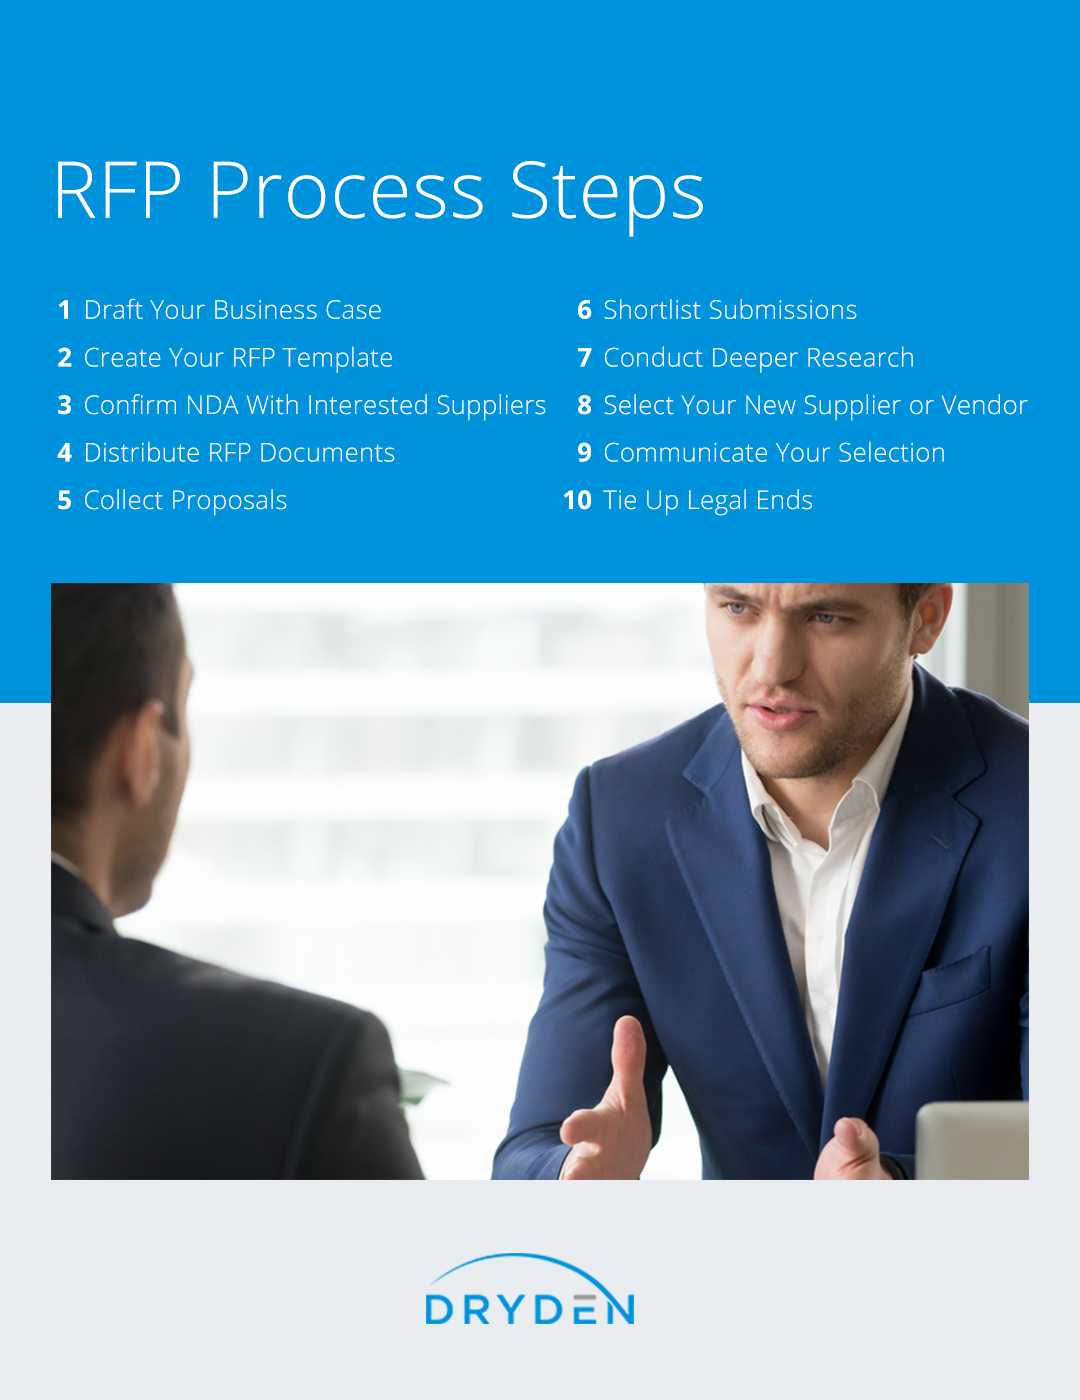 Dryden Steps To RFP Process